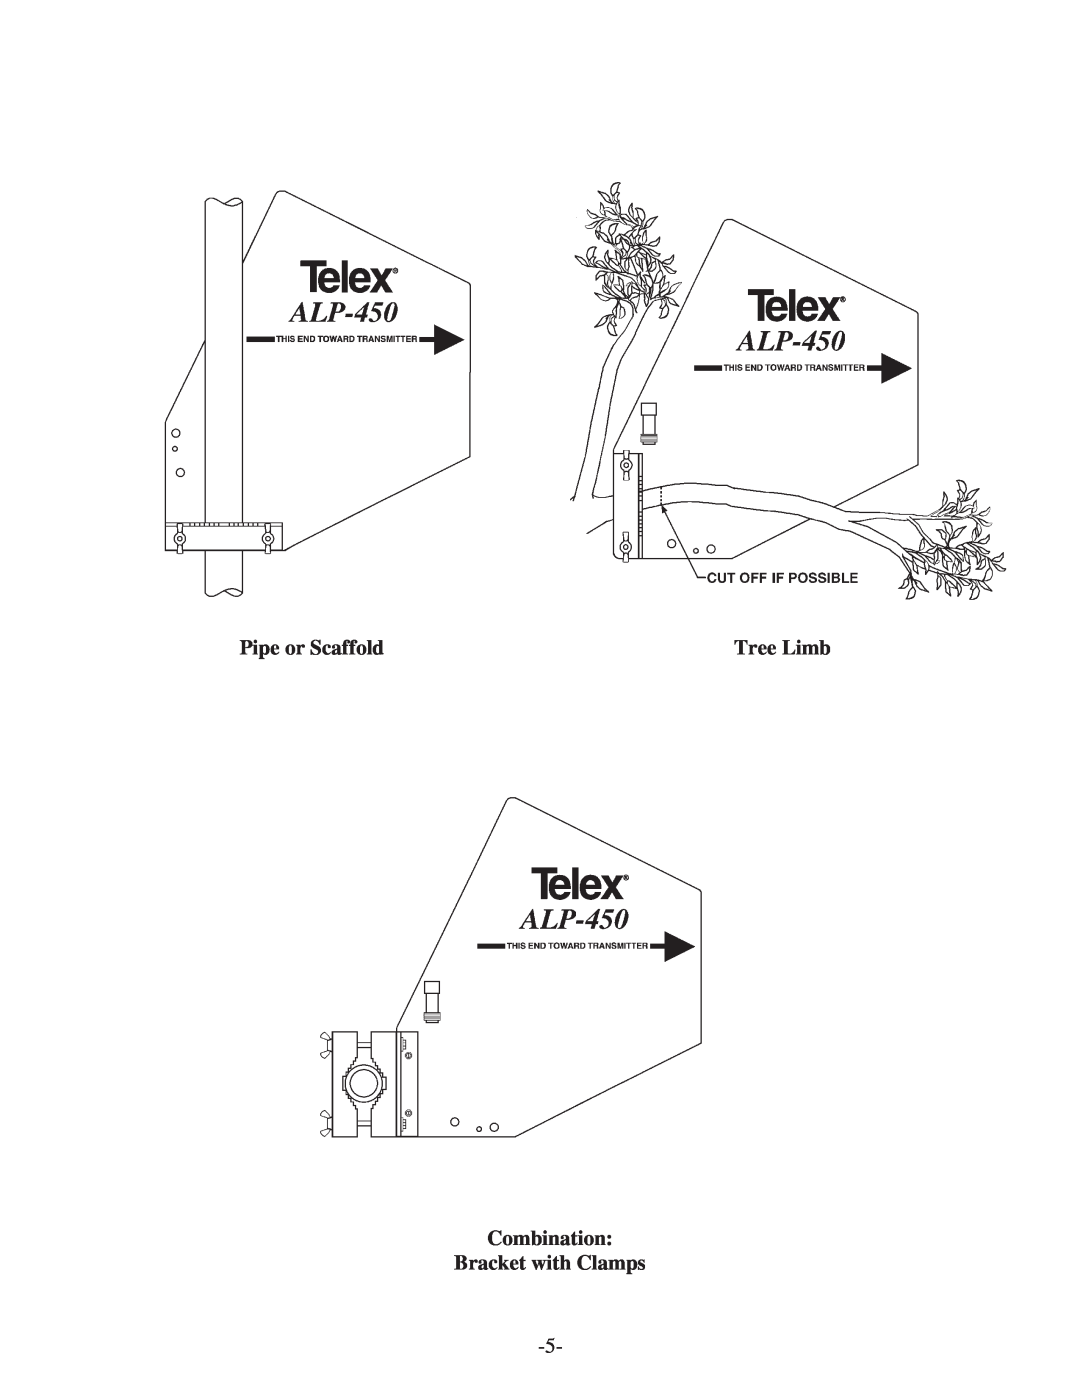 Telex ALP-450 instruction manual Pipe or Scaffold, Tree Limb, Combination Bracket with Clamps 